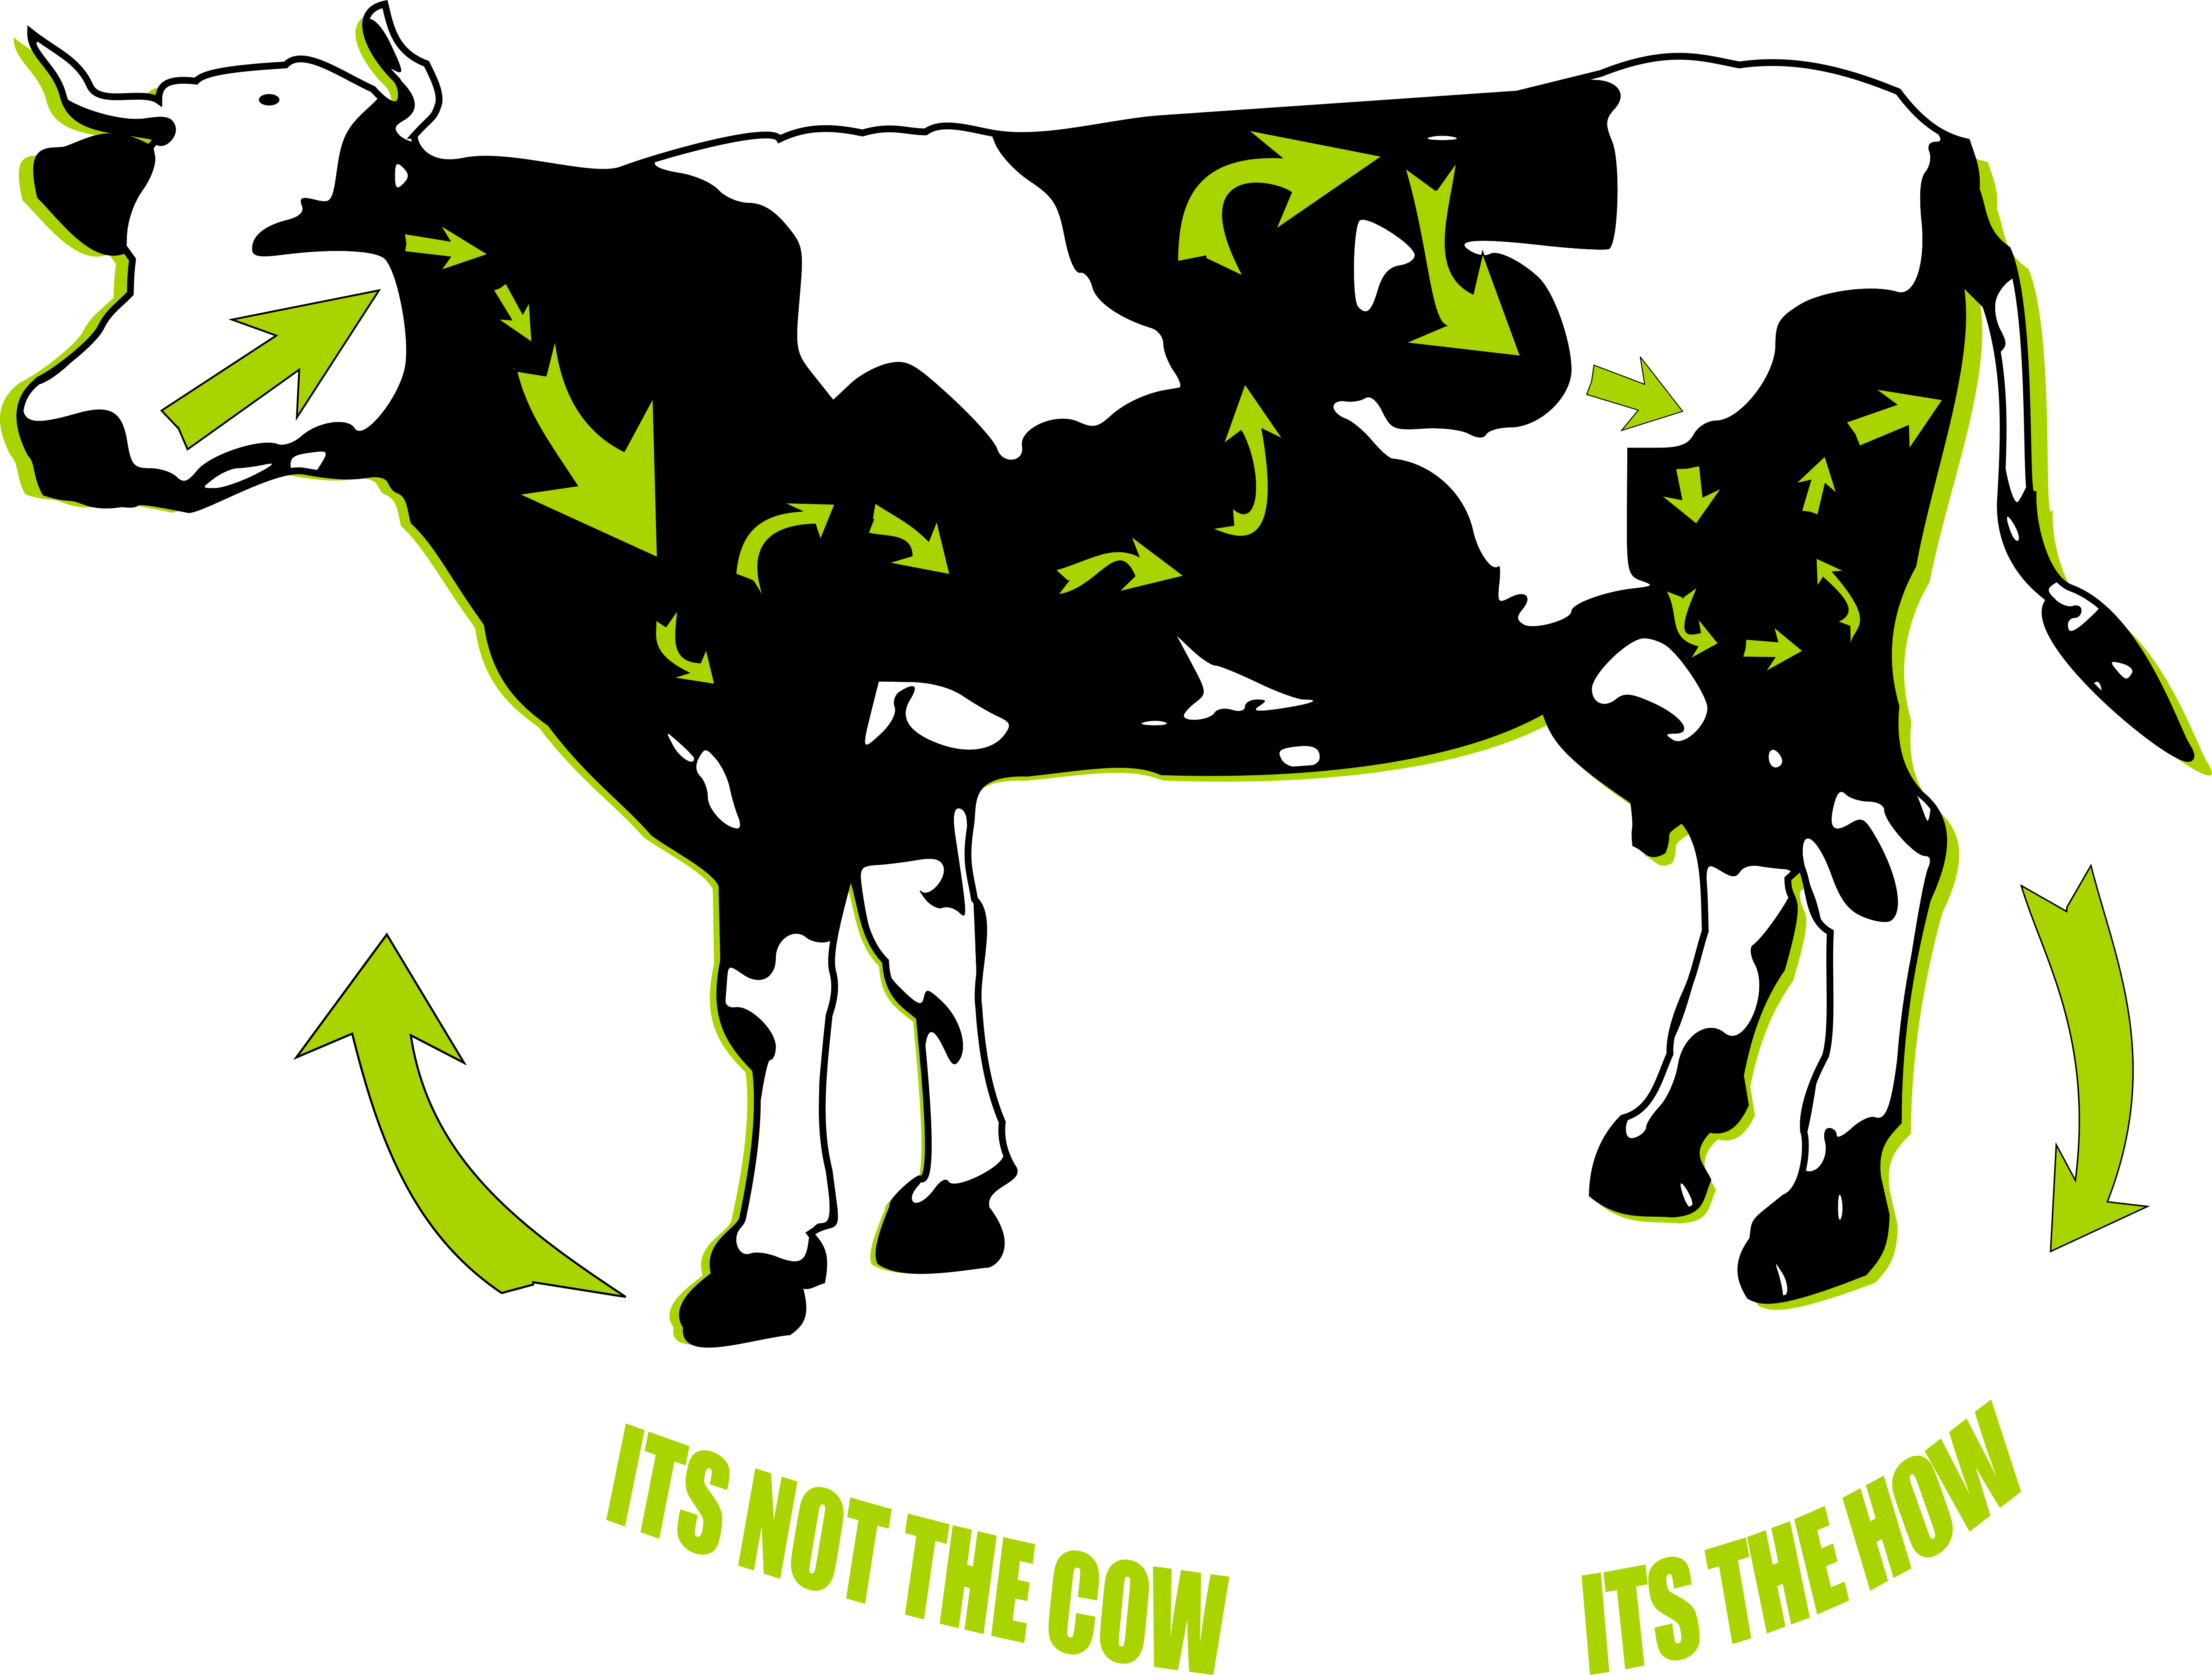 Regenerative agriculture design "Its not the cow, its the how".